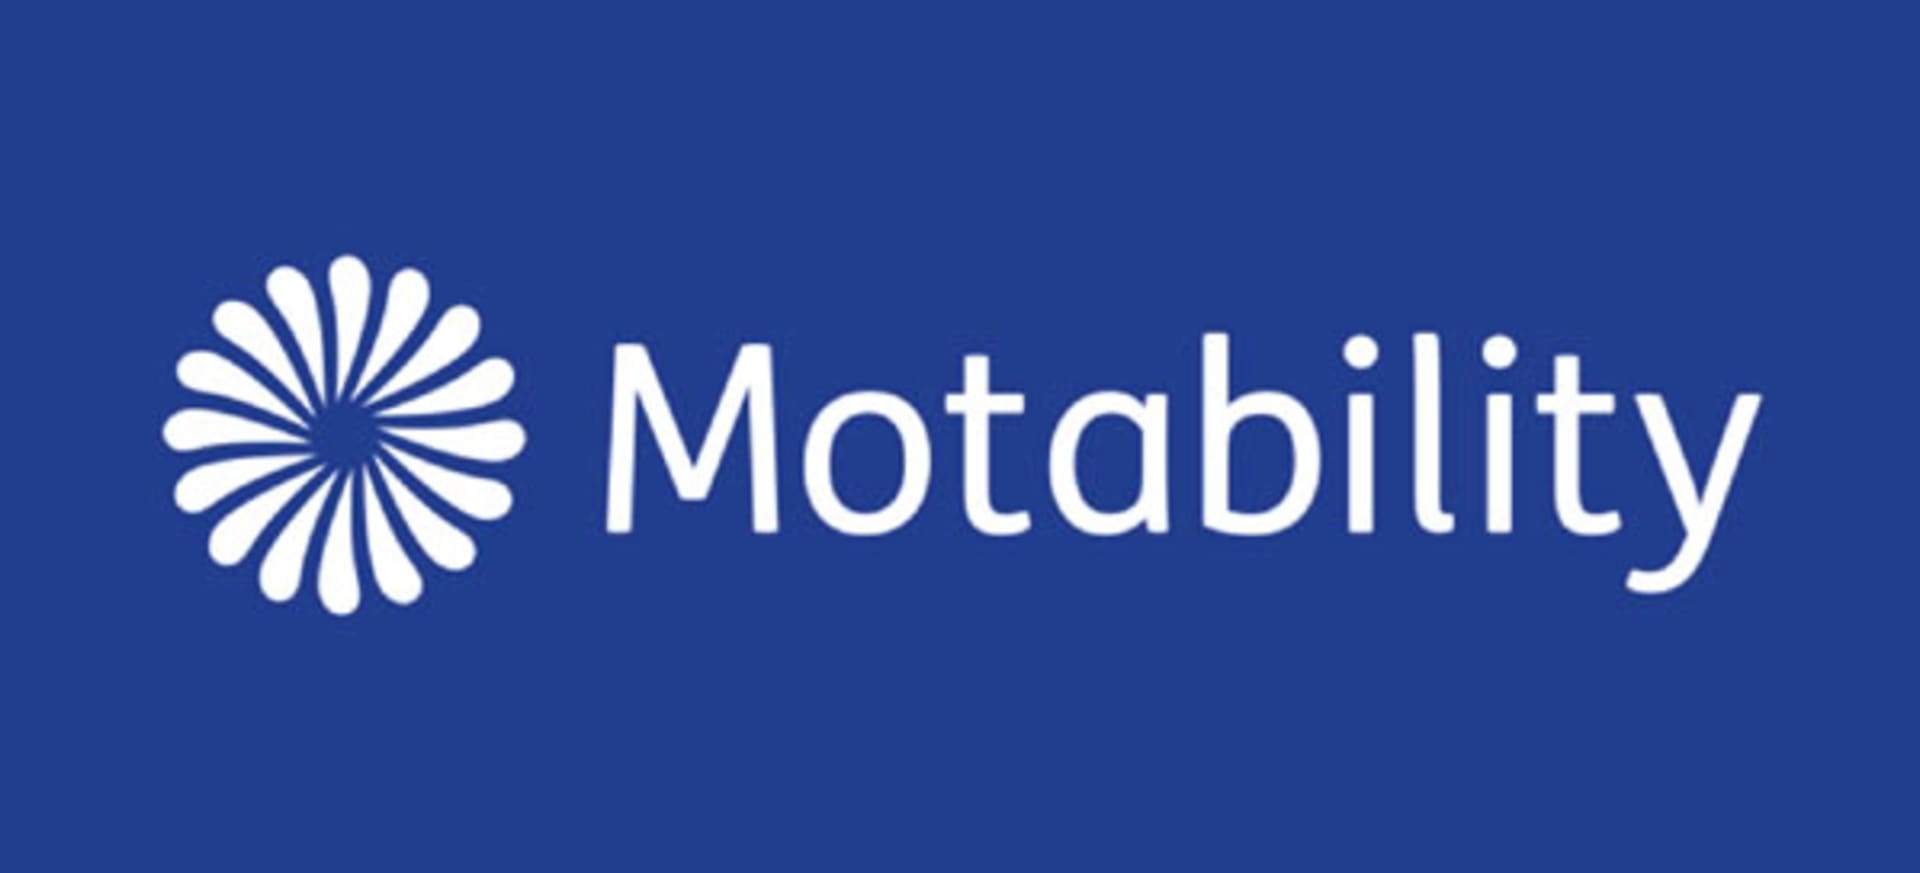 NEW HONDA CARS AVAILABLE ON MOTABILITYS AVAILABLE FOR MARCH 23 REGISTRATION